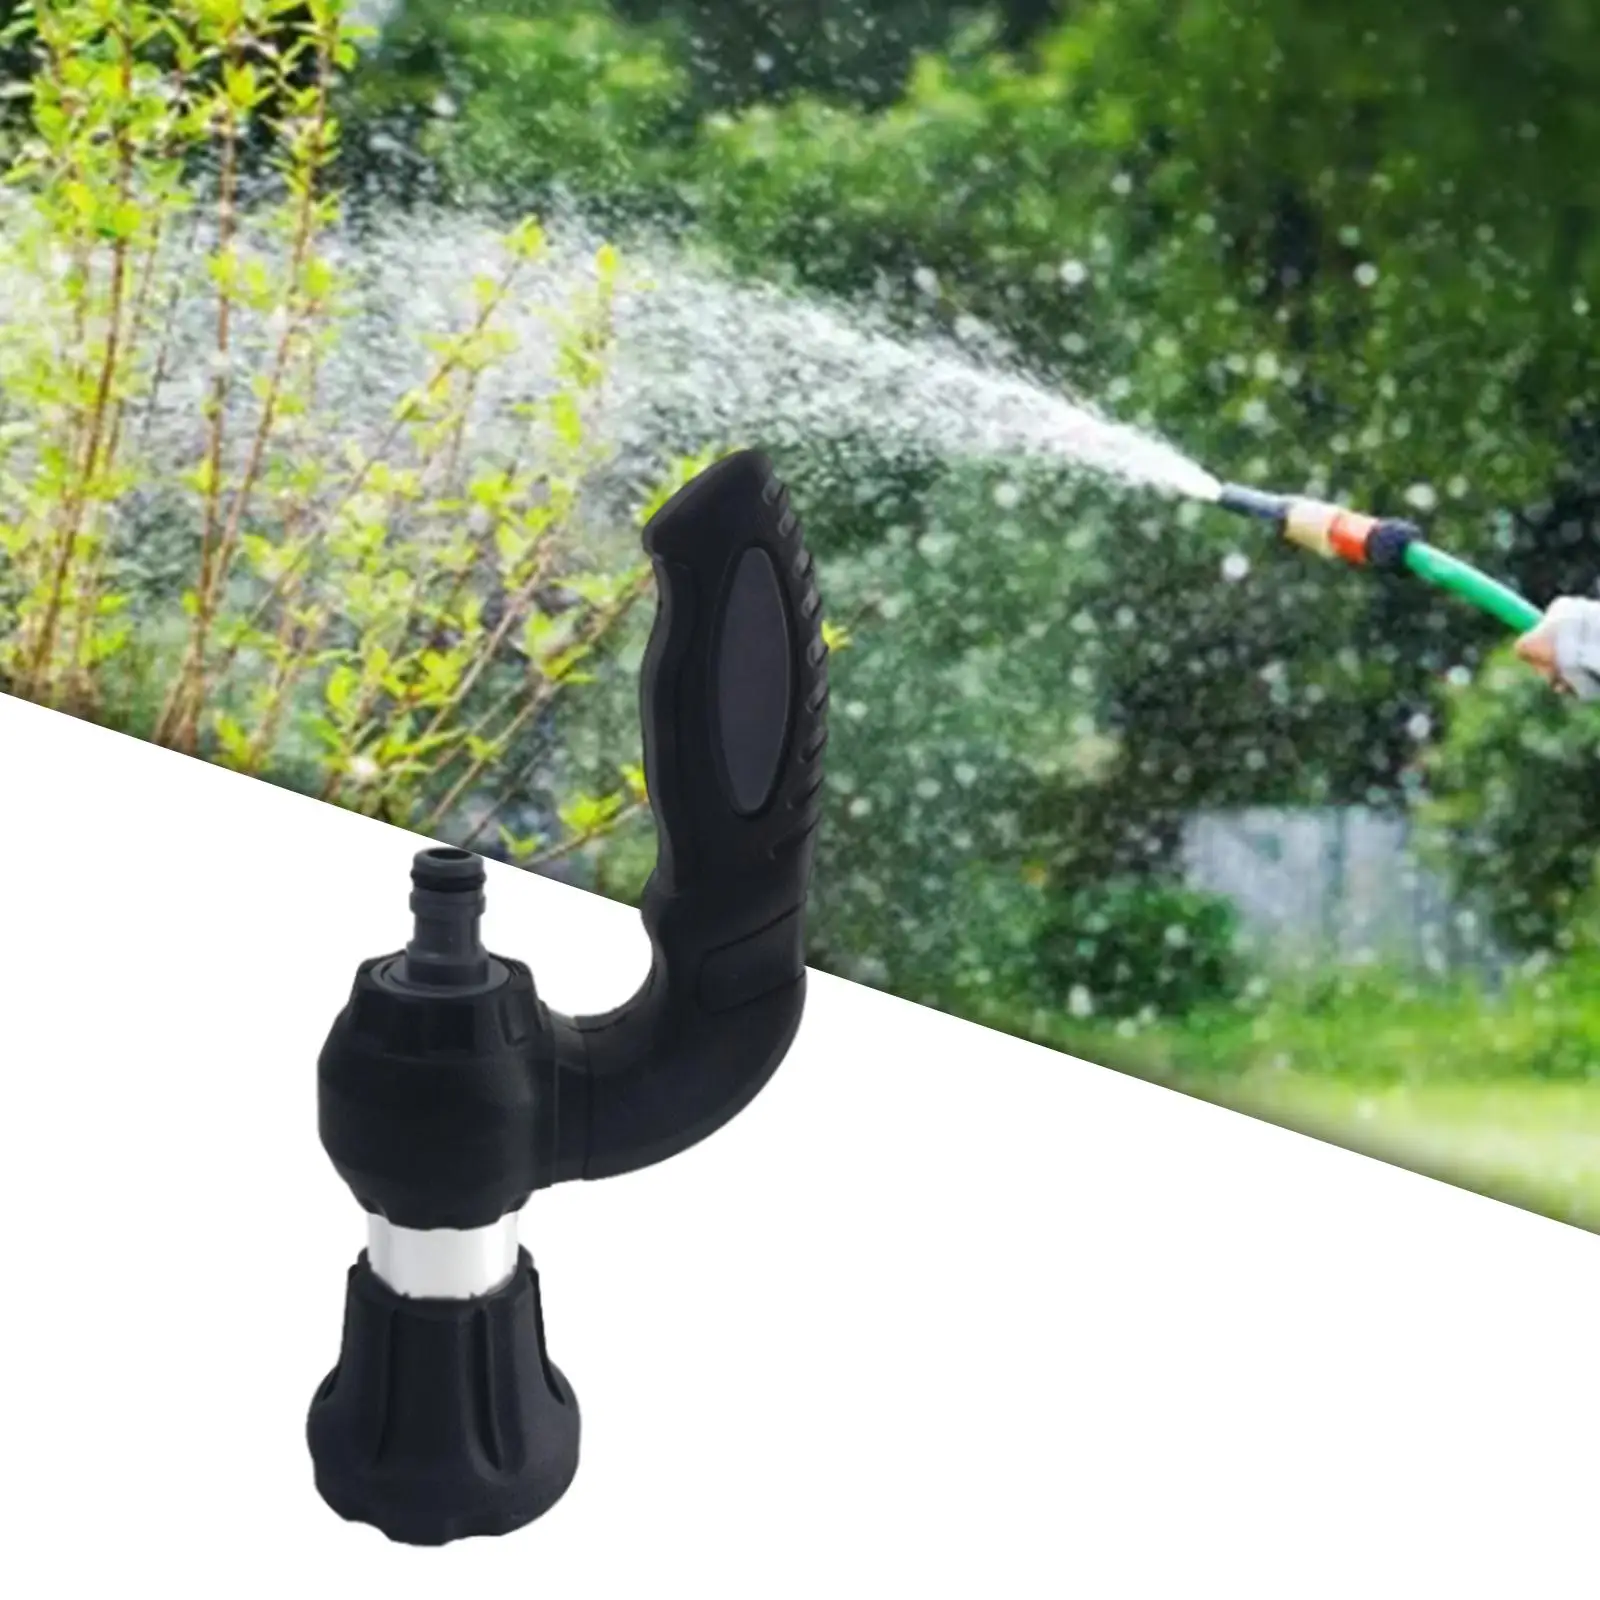 Hose Spray Nozzle, Water Spray Can, Thumb Control Leakproof High Pressure Washer Sprayer, Water Hose Nozzle, for Home Watering